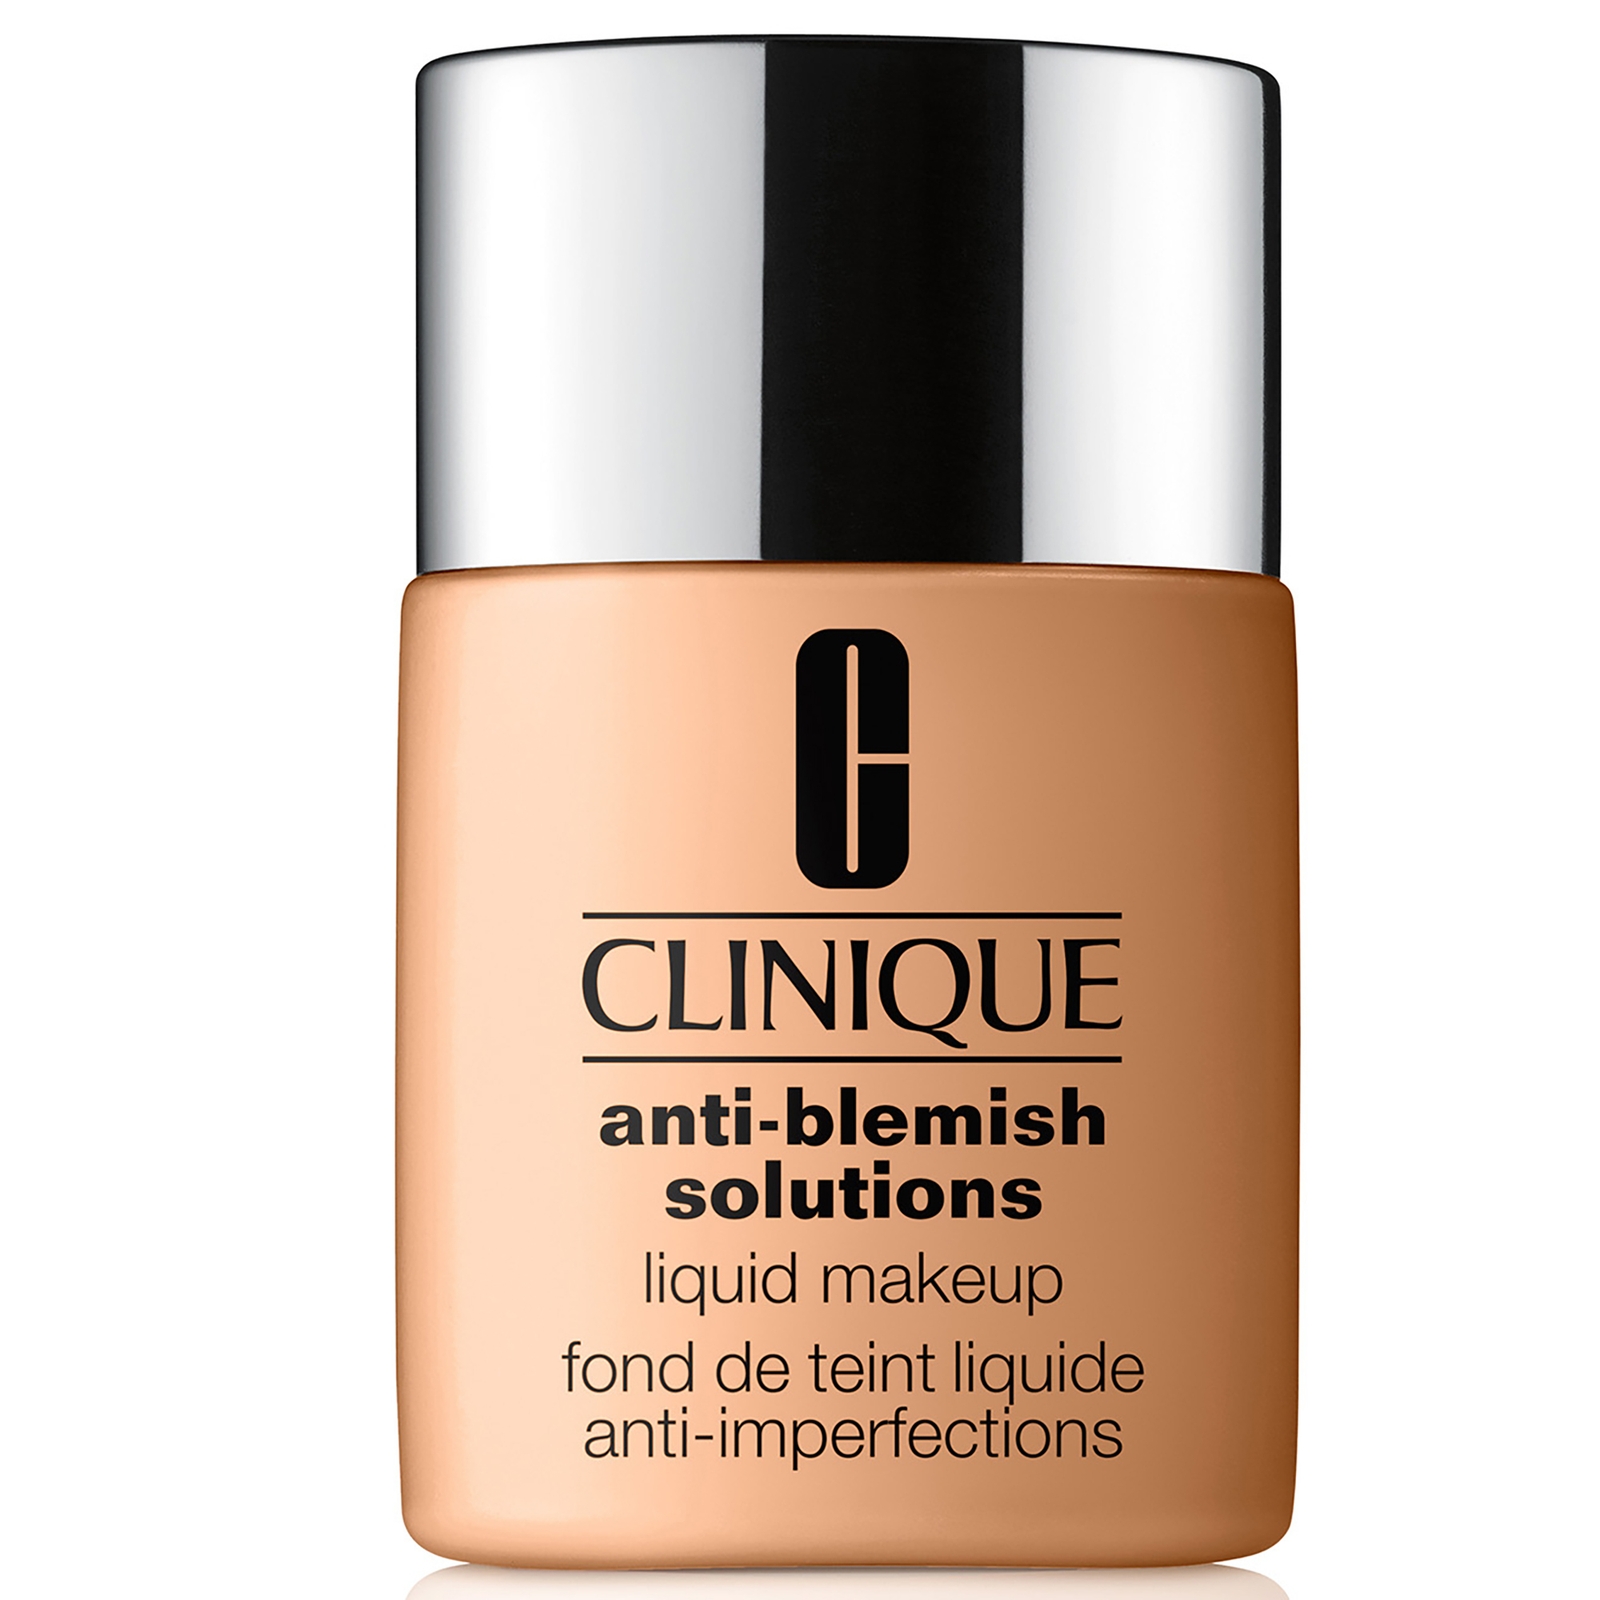 Clinique Anti-Blemish Solutions Liquid Makeup with Salicylic Acid 30ml (Various Shades) - WN 38 Ston